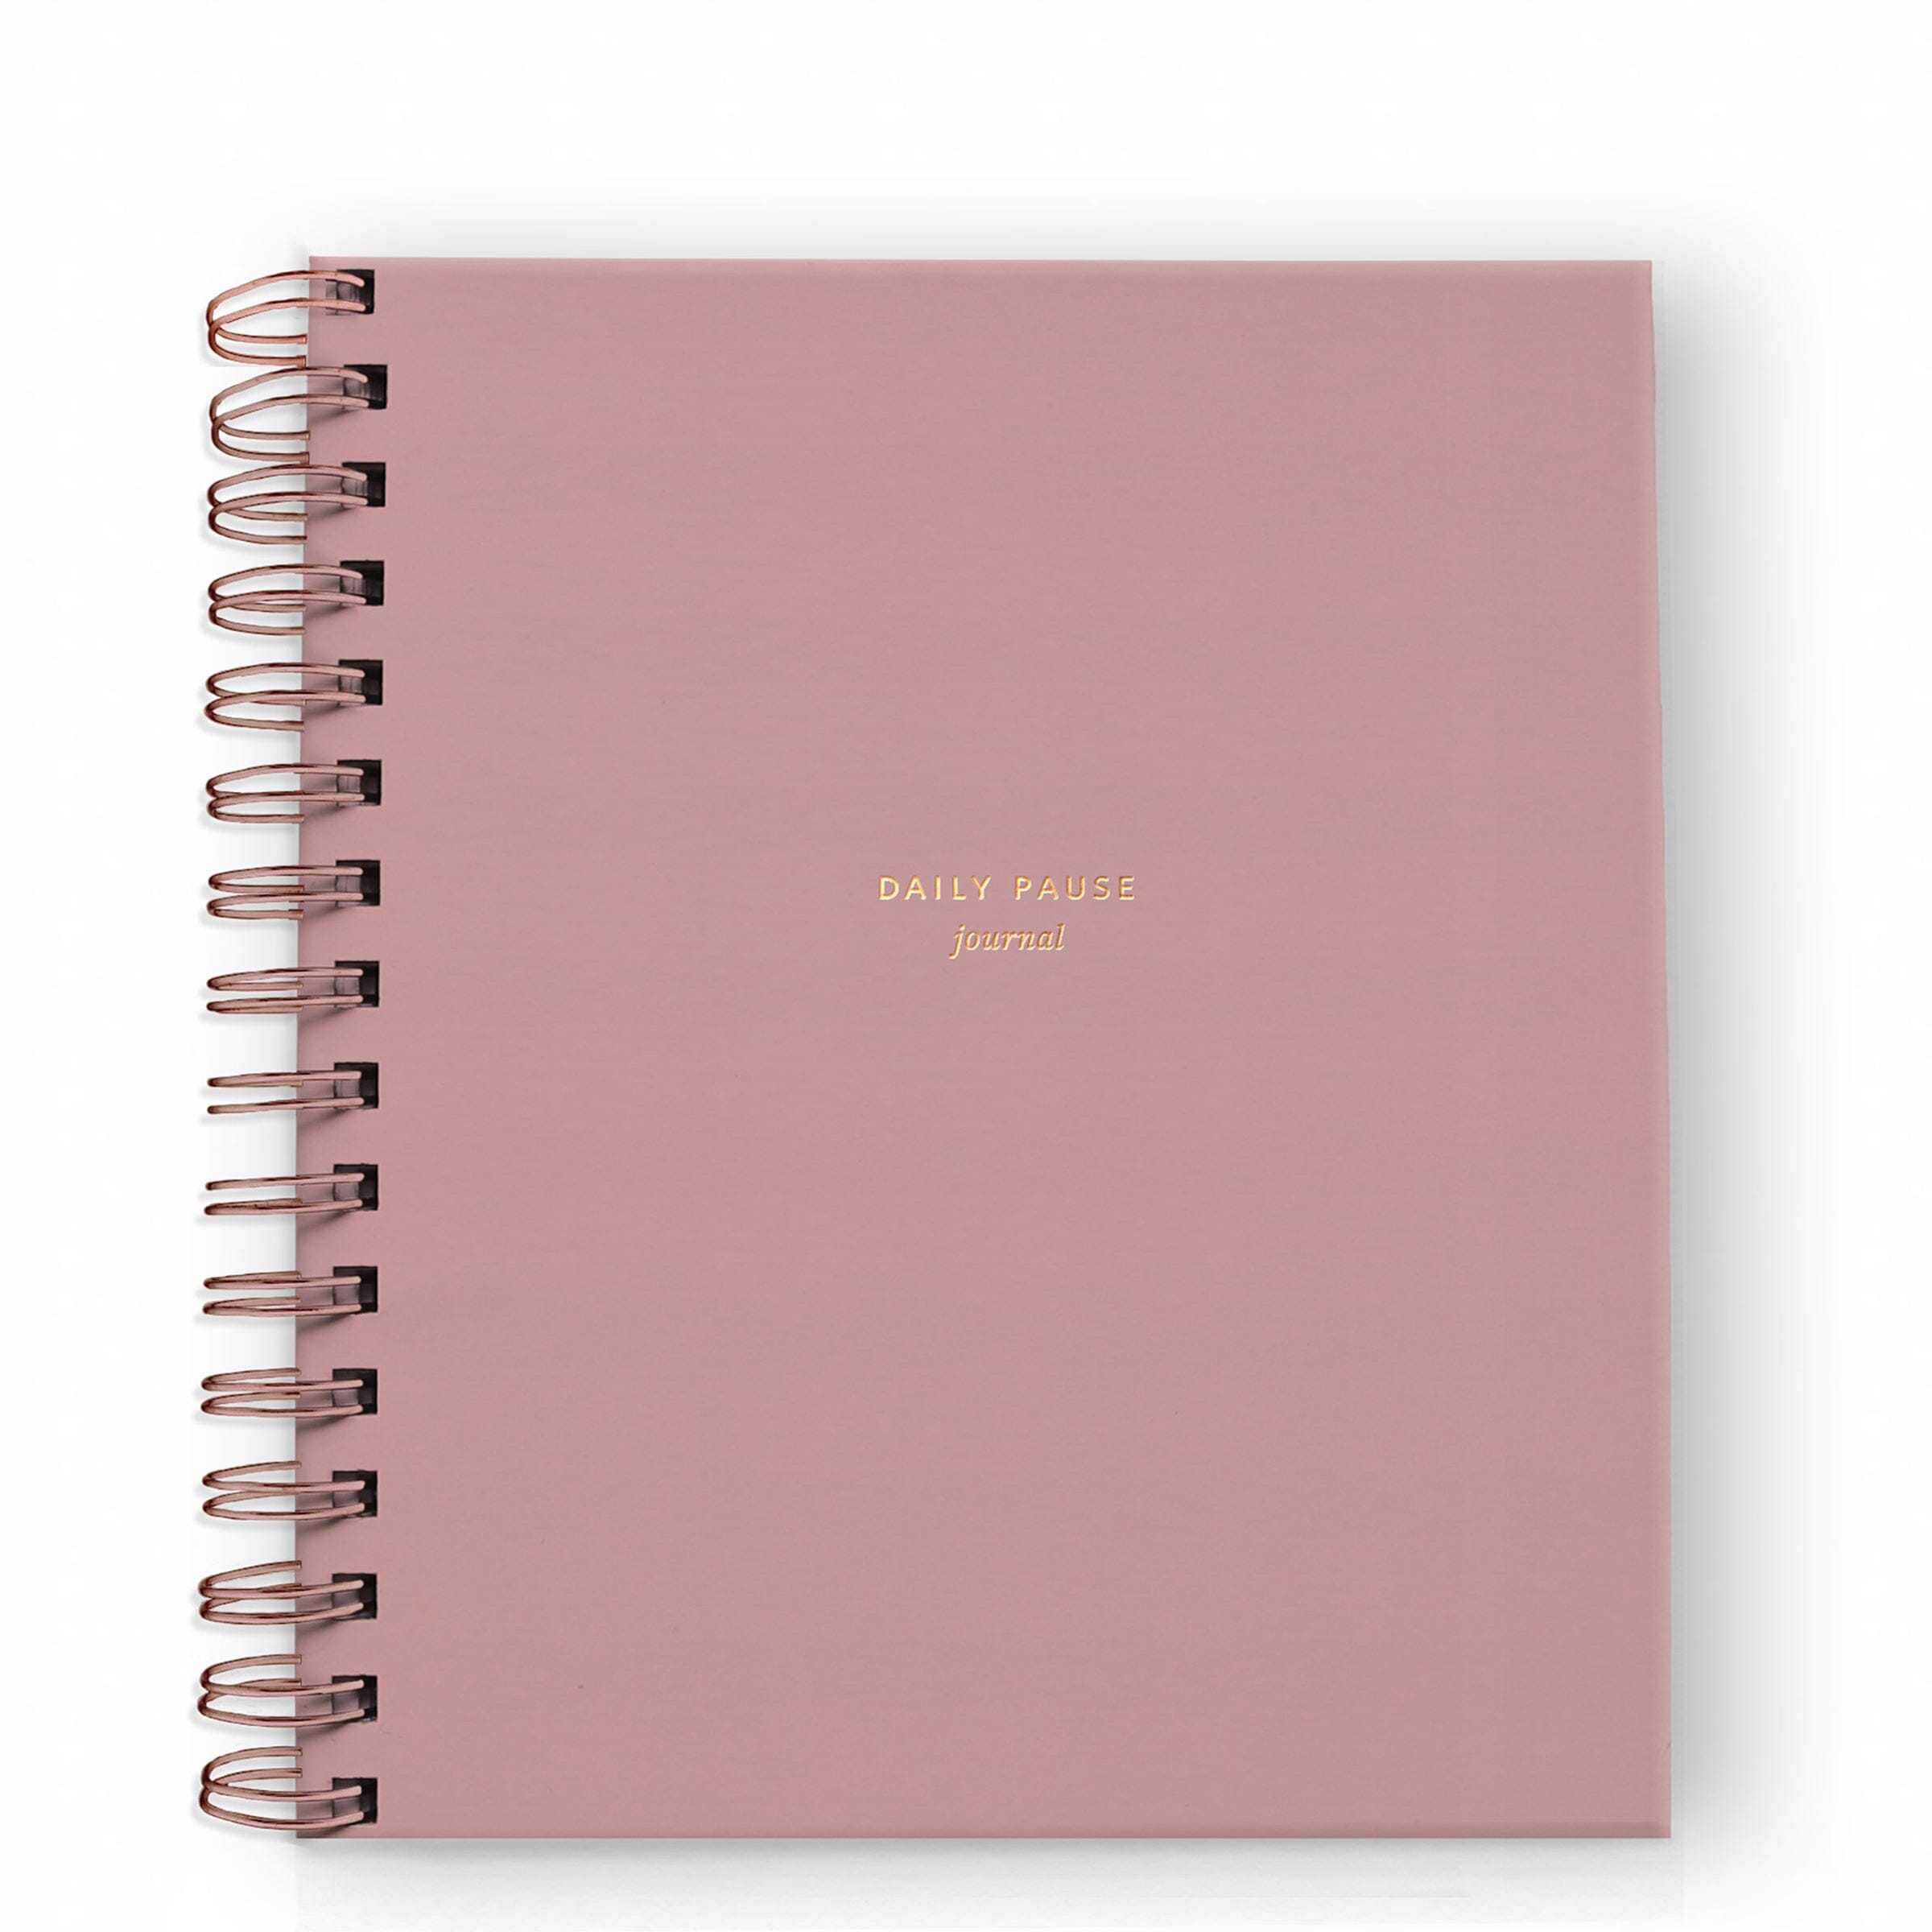 Daily Pause Journal - 5 Colors - Ramona & Ruth Dusty Rose 